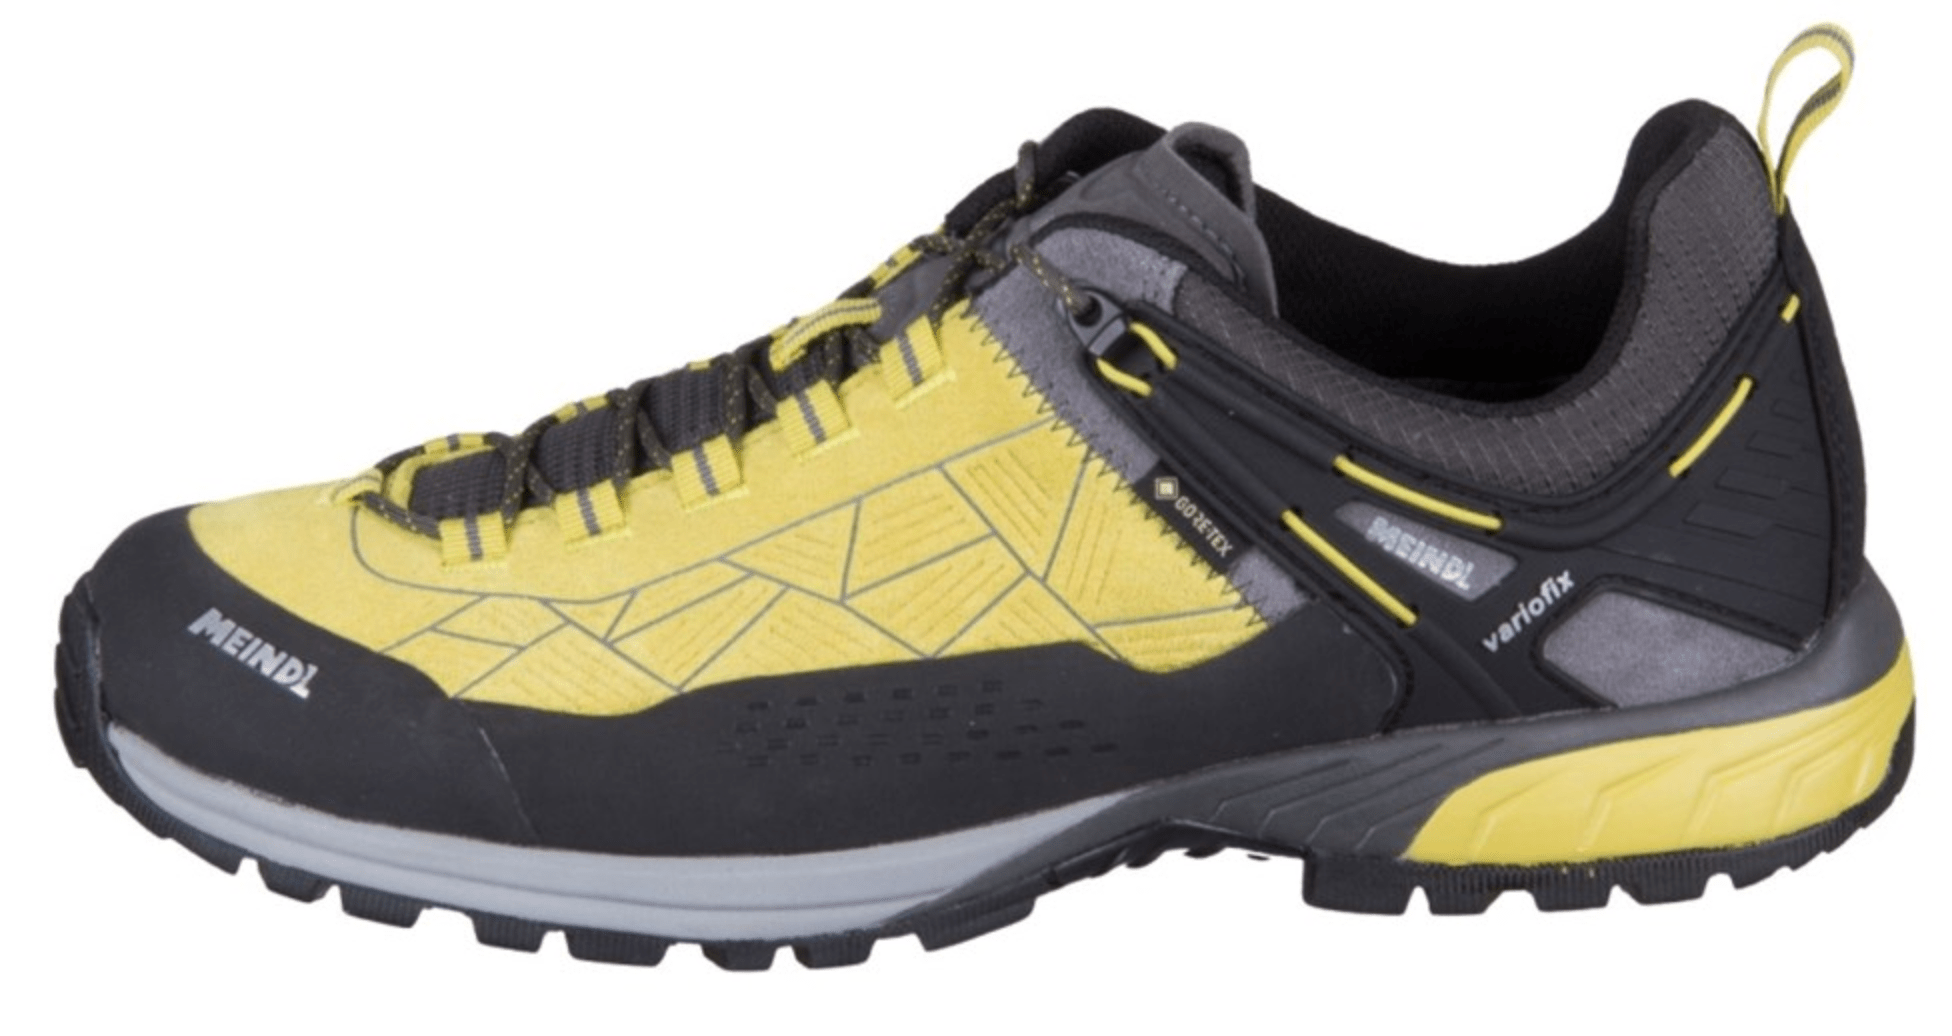 Meindl Shoes Meindl Top Trail GTX Yellow M's